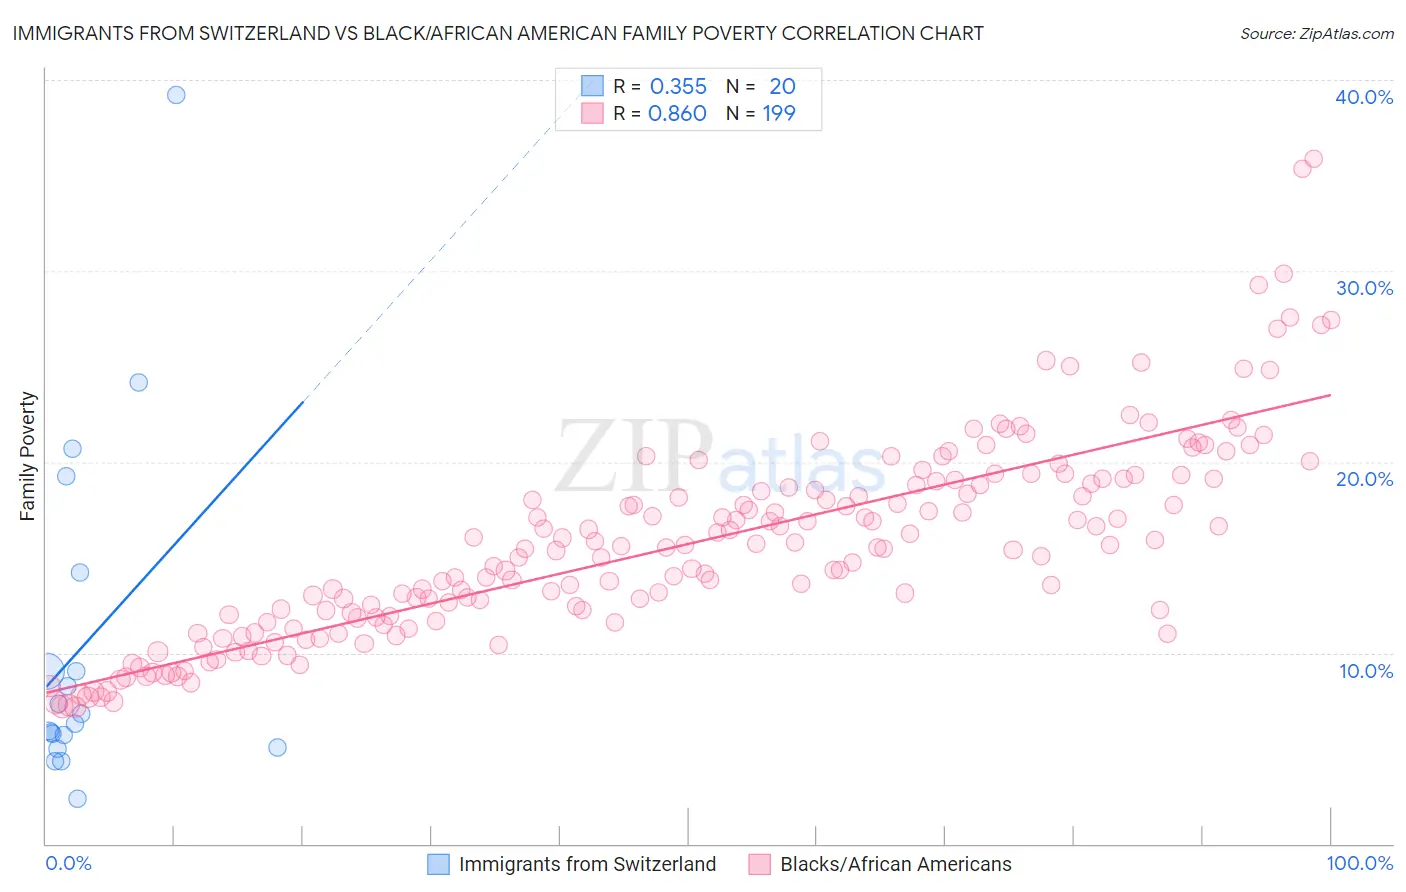 Immigrants from Switzerland vs Black/African American Family Poverty